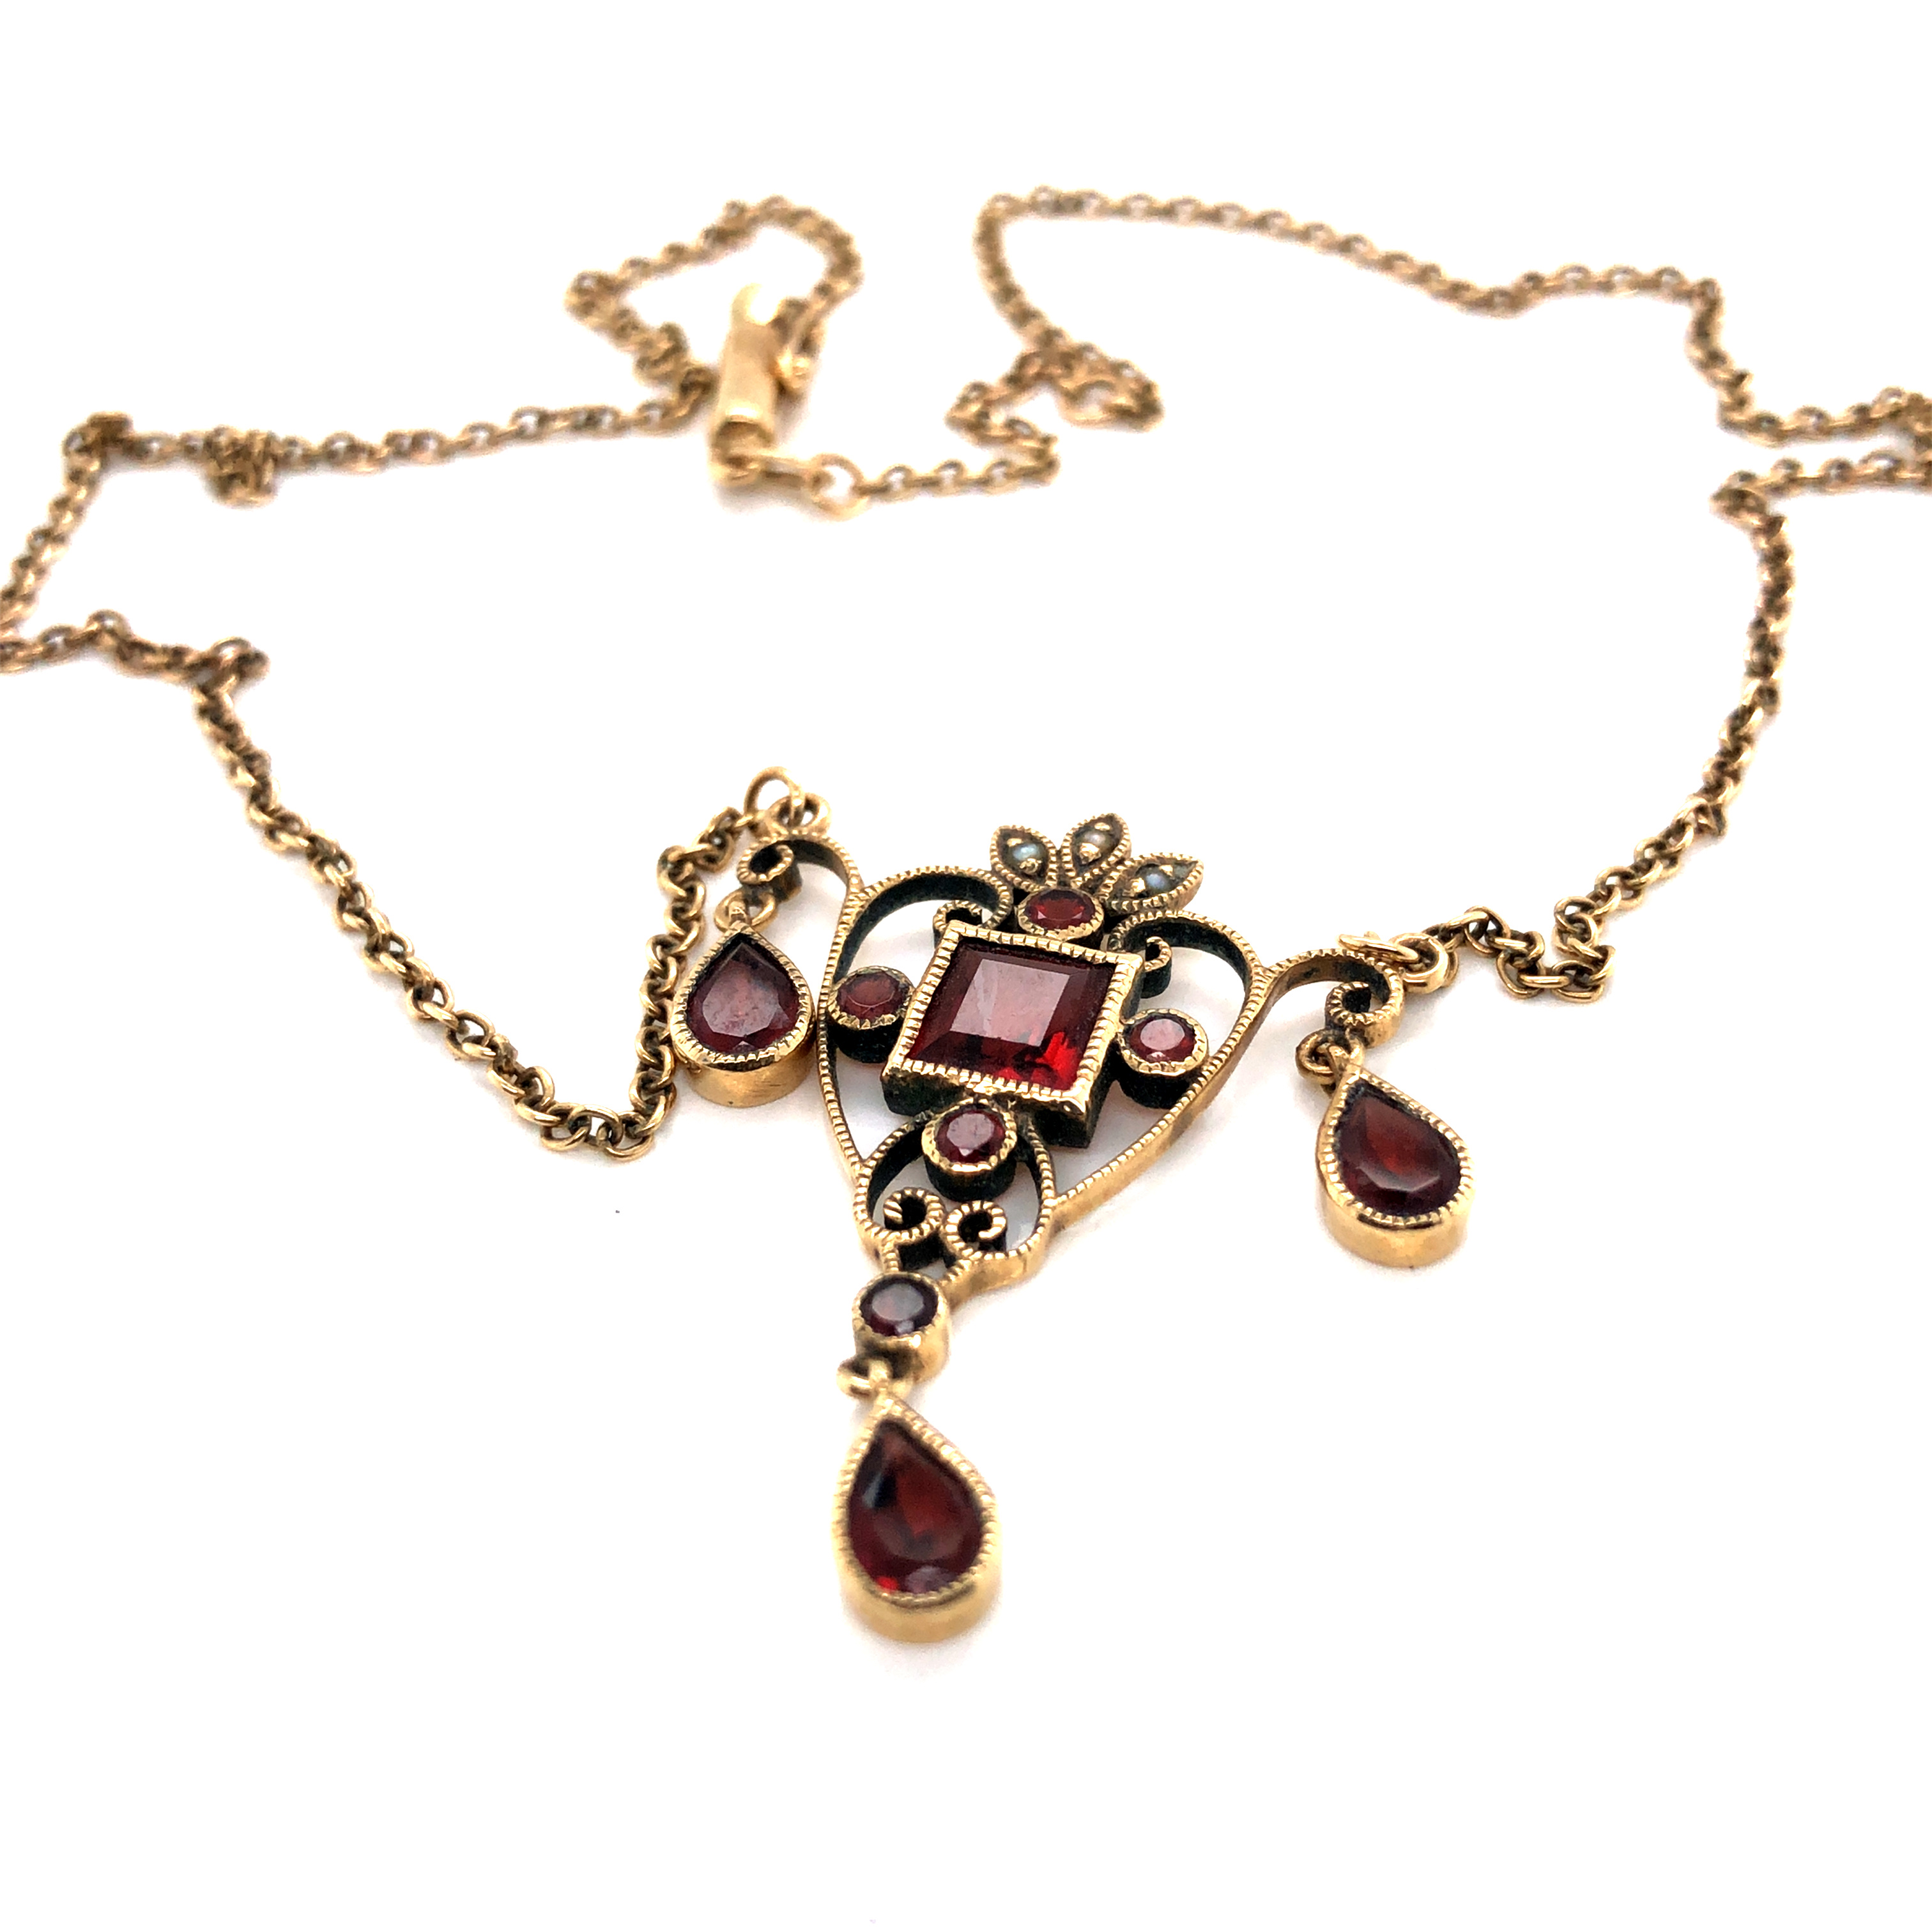 A 9ct HALLMARKED GOLD, GARNET AND SEED PEARL LAVALIERE STYLE NECKLACE. THE HEART FORM PENDANT WITH - Image 4 of 4